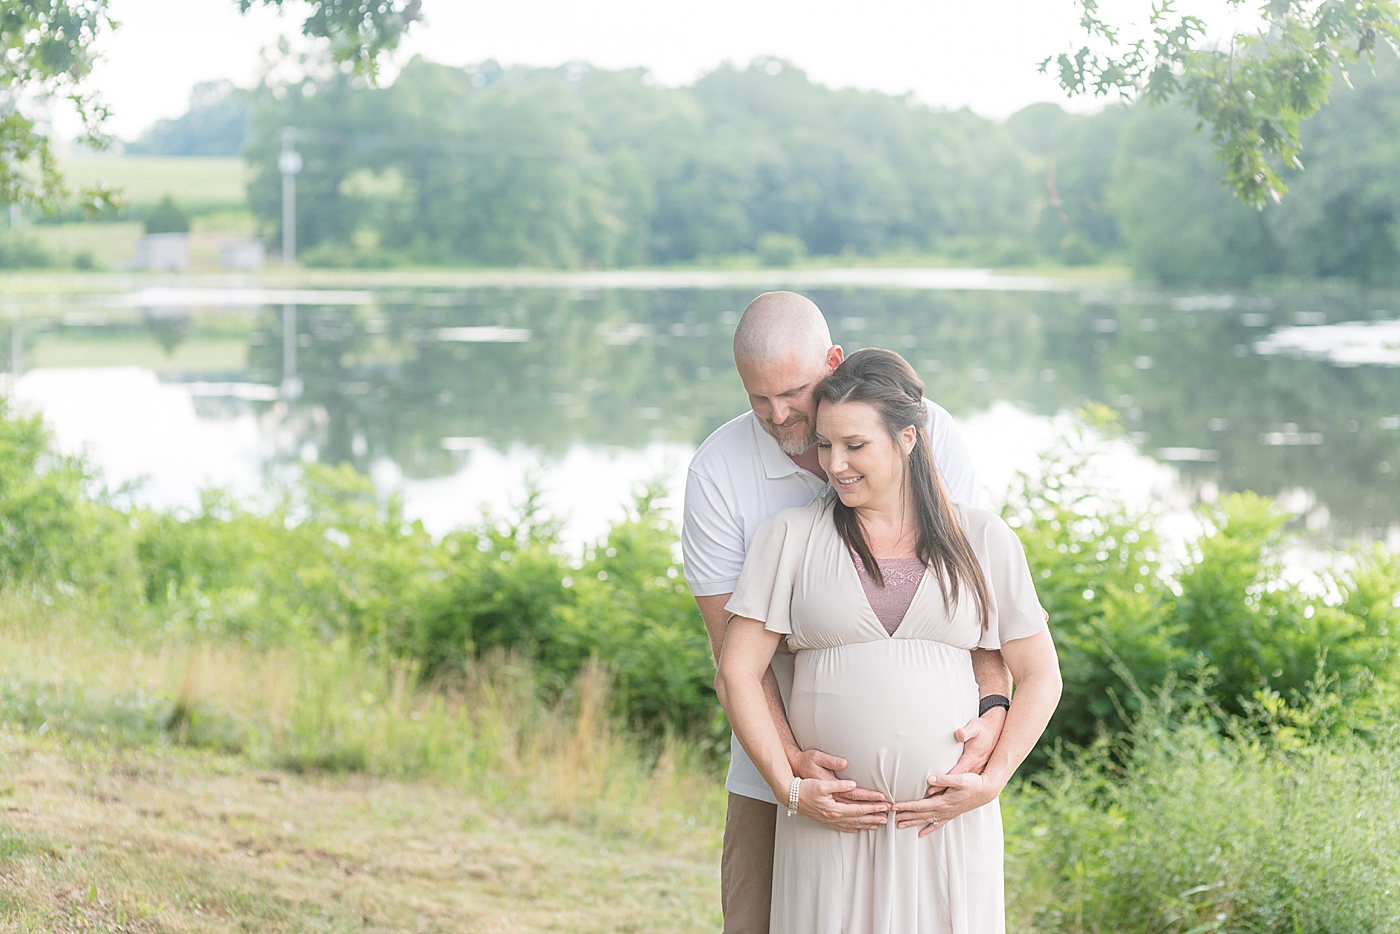 Mom and dad holding moms growing belly | Photo by Anna Wisjo Photography